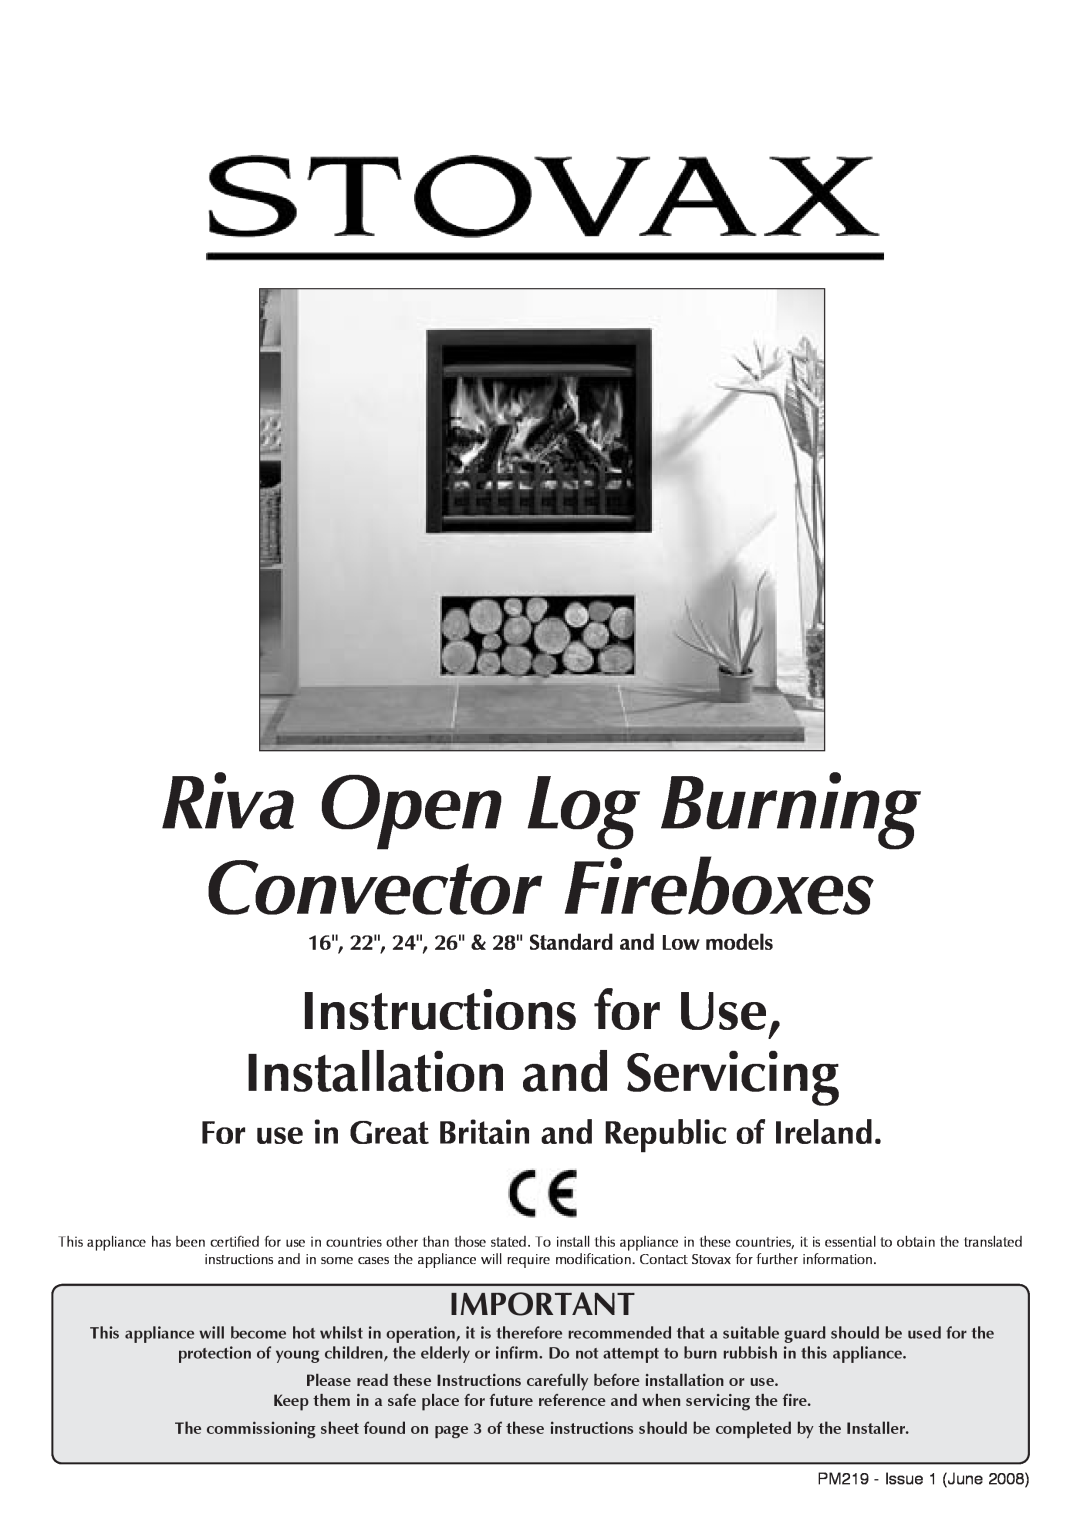 Stovax PM219 manual 16, 22, 24, 26 & 28 Standard and Low models, Riva Open Log Burning Convector Fireboxes 